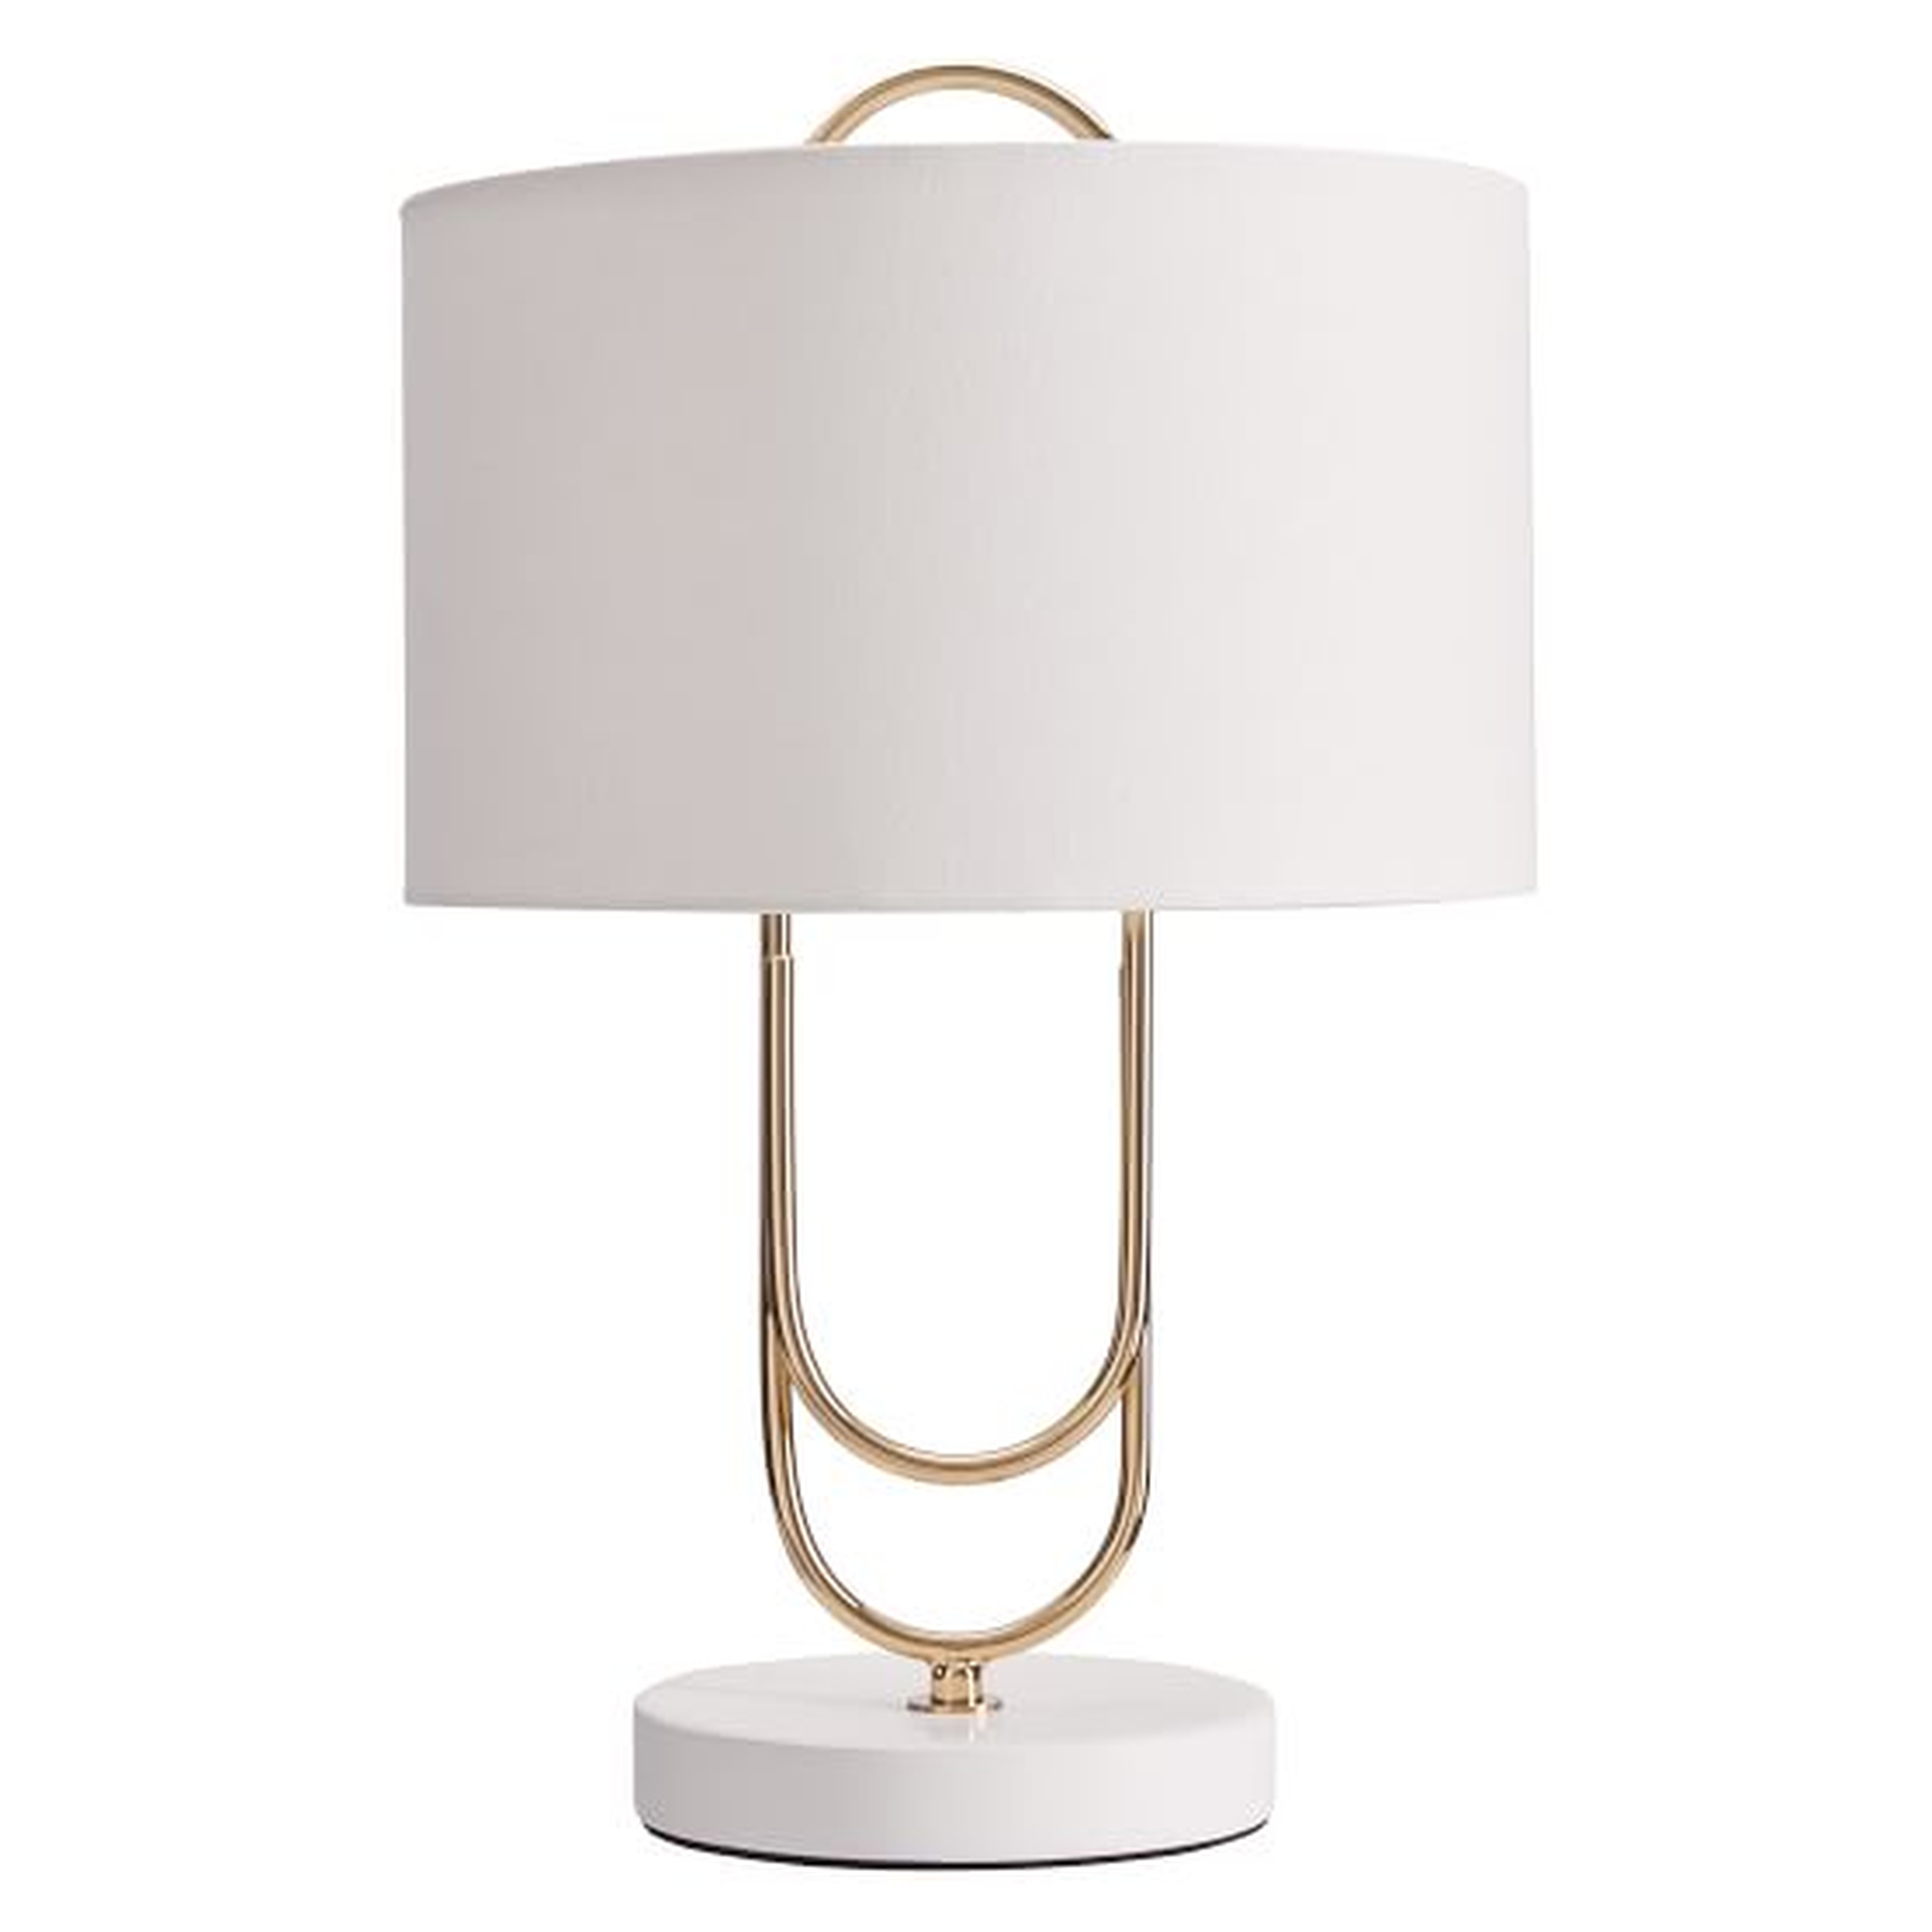 Paper Clip Table Lamp - Pottery Barn Teen